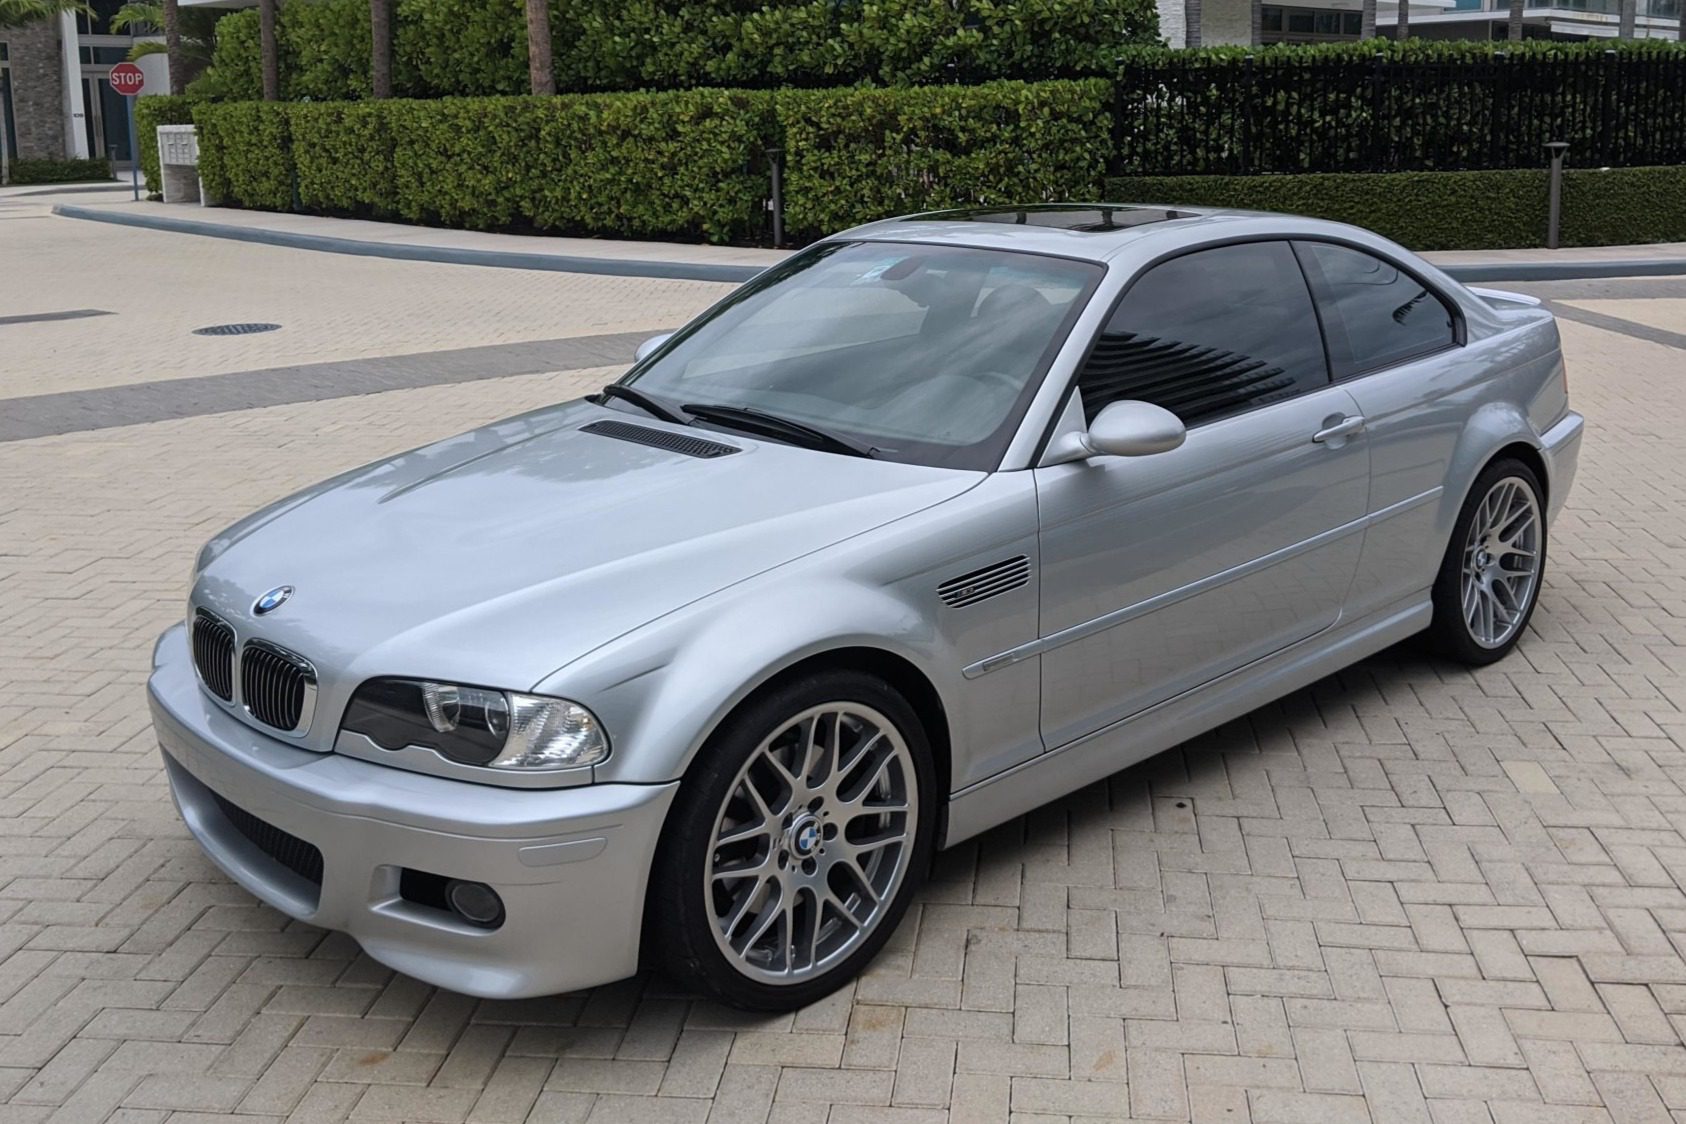 Manual 2002 BMW E46 M3 doubles its price in two days